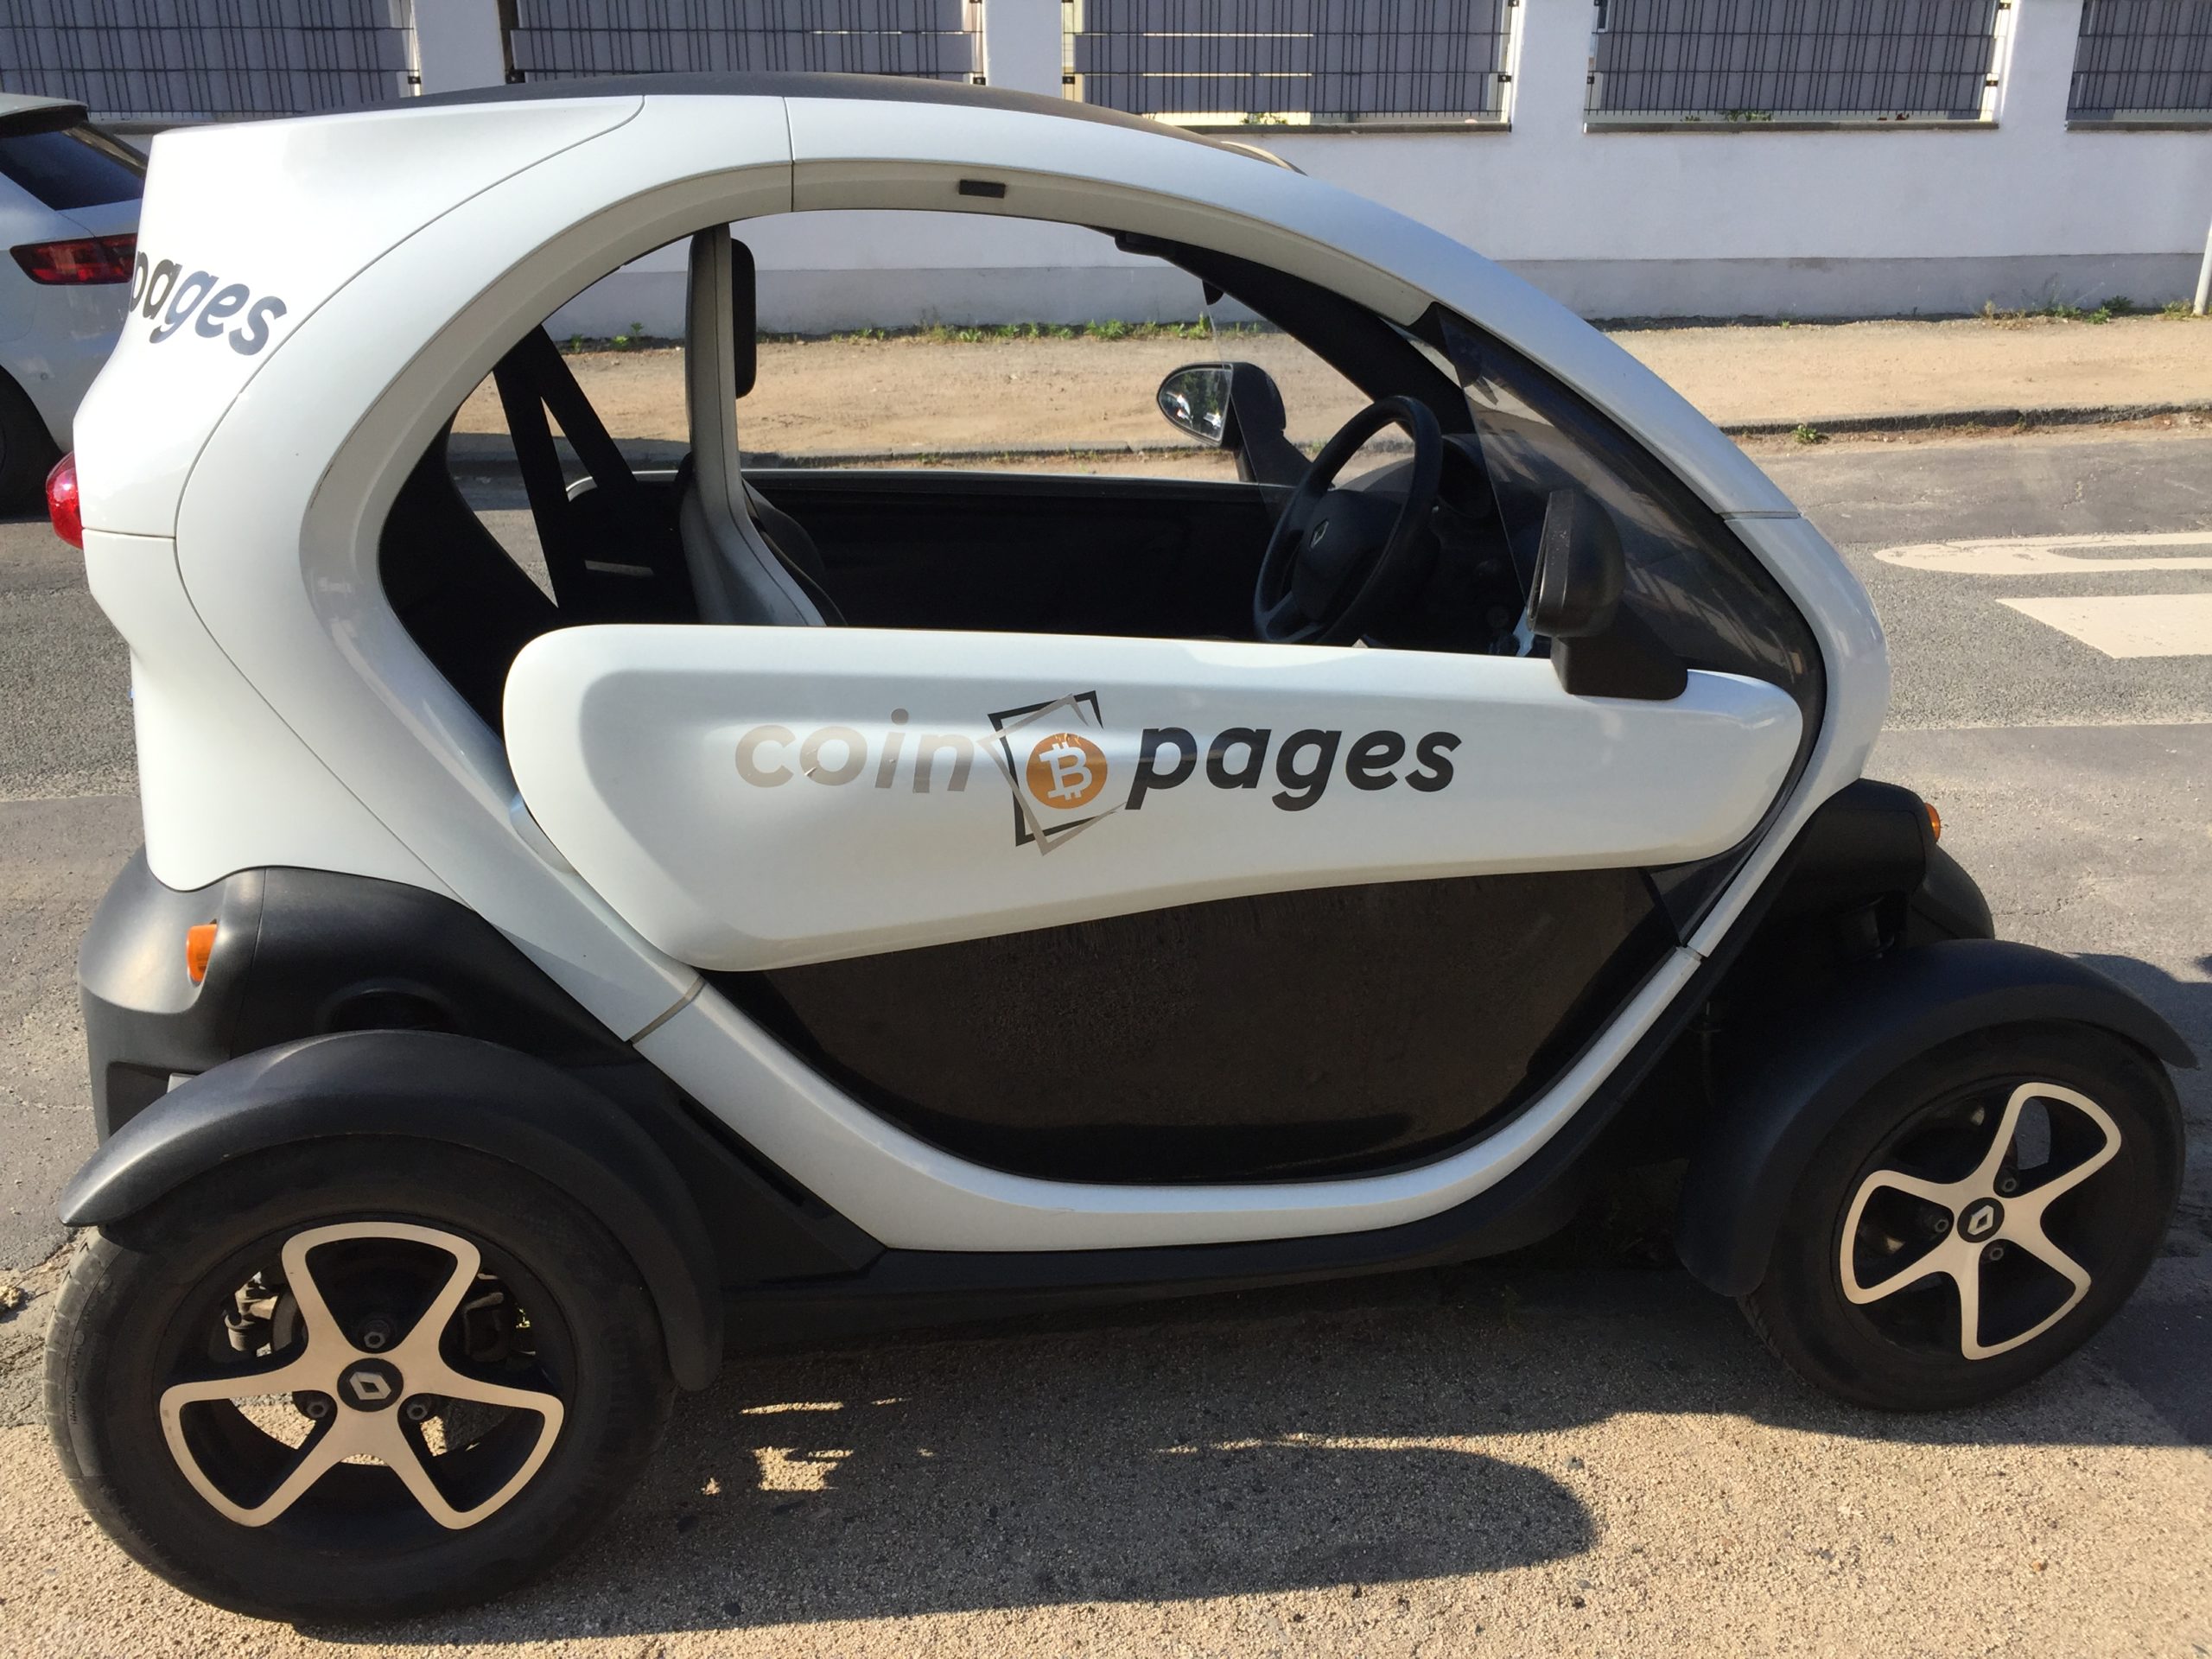 Coinpages mobile with the Coinpages Twizy